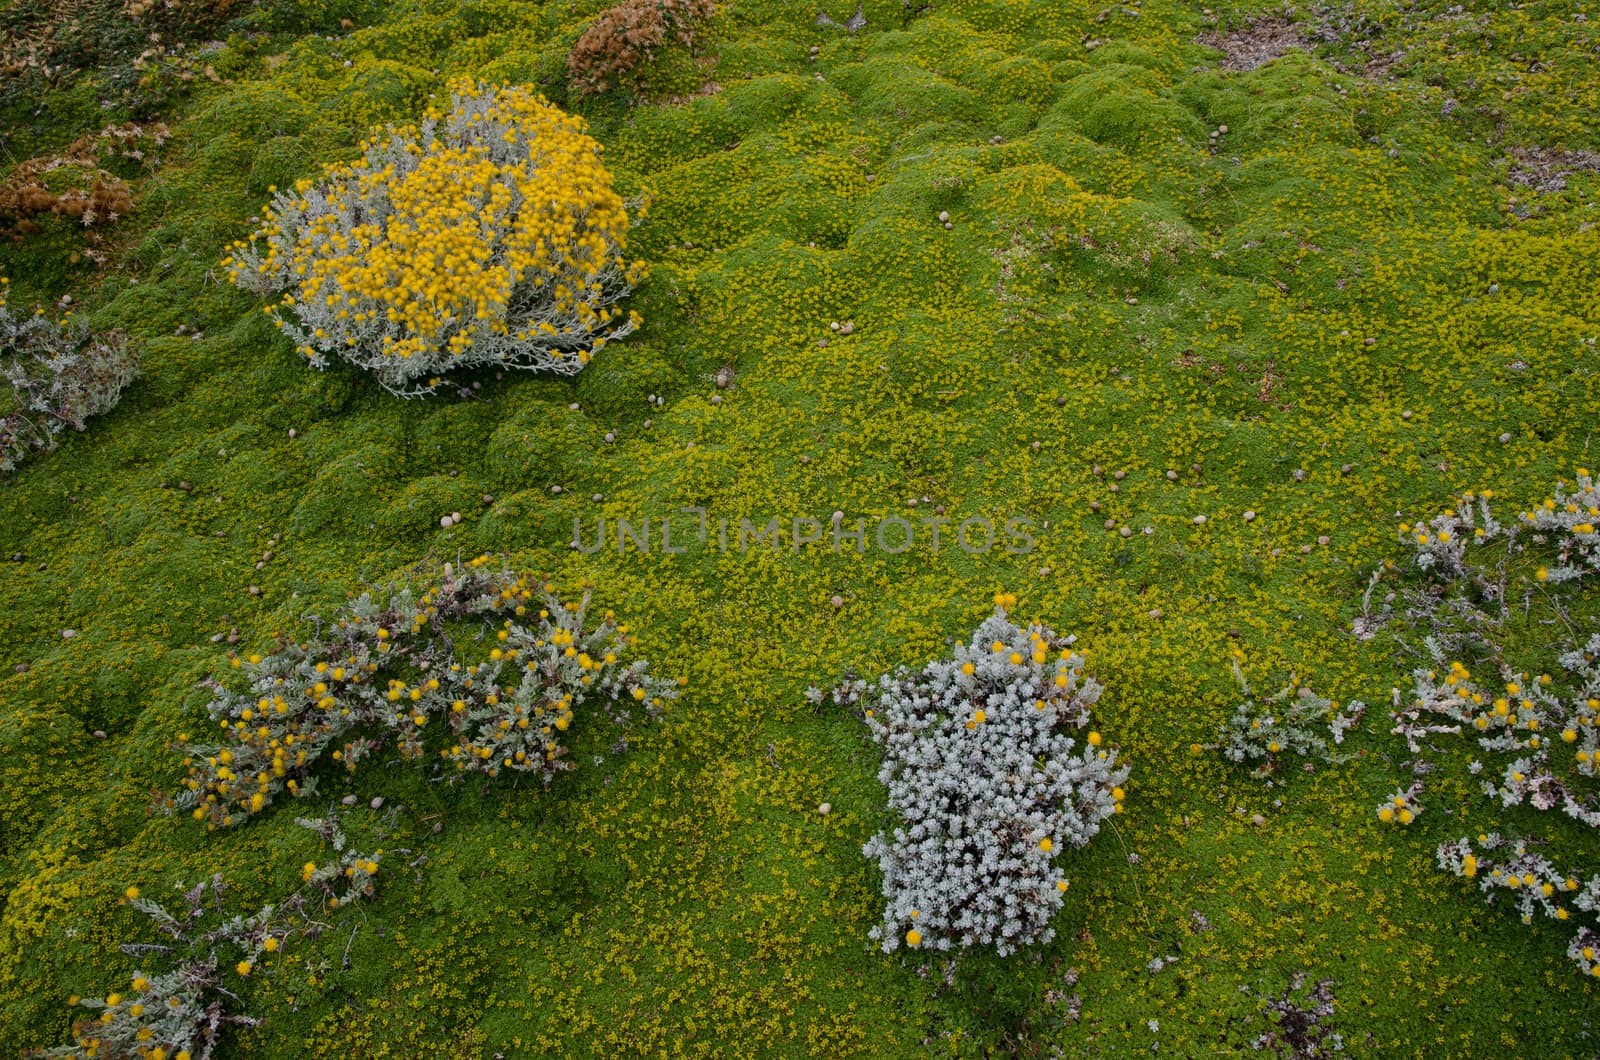 Plants of Senecio sp. and ground covered by vegetation. Otway Sound and Penguin Reserve. Magallanes Province. Magallanes and Chilean Antarctic Region. Chile.